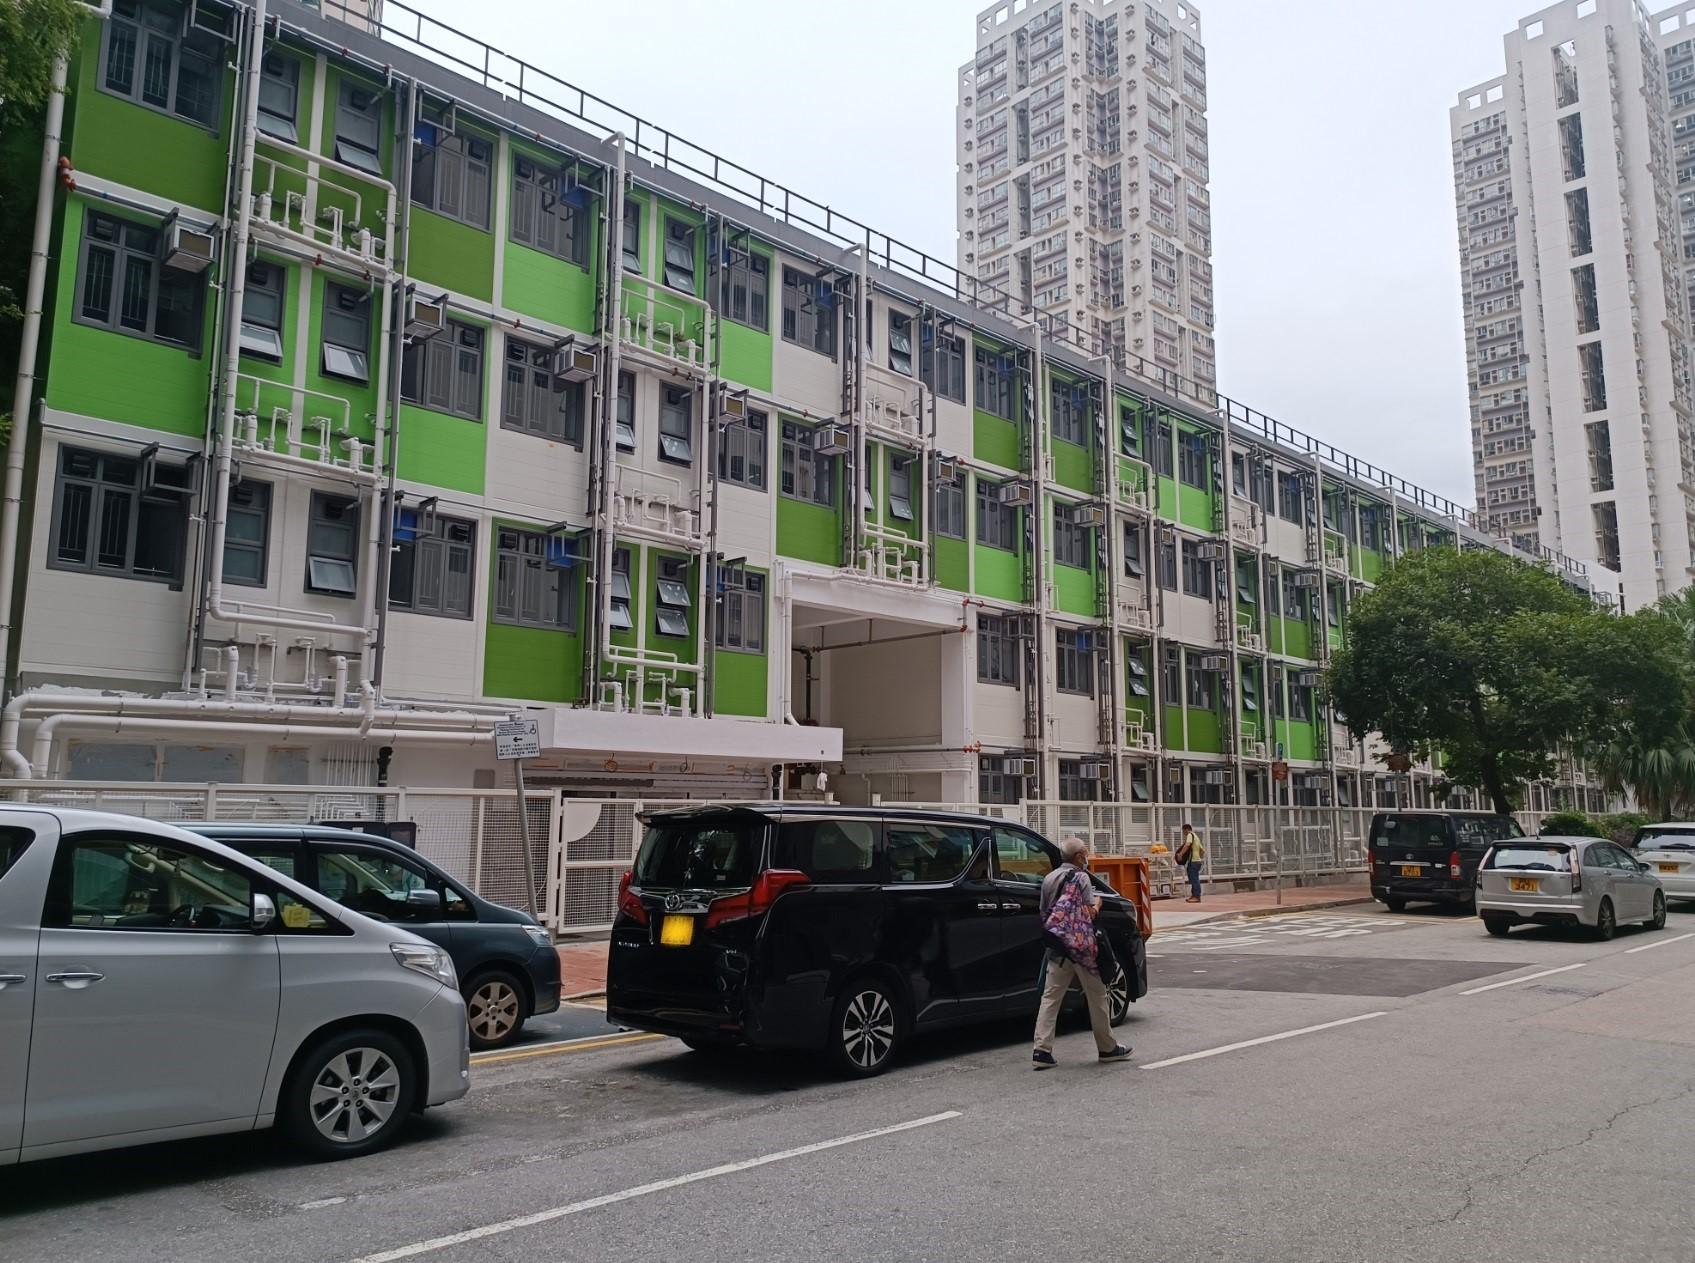 The Housing Bureau will organise a Transitional Housing Open Day on September 24 (Sunday) and provide shuttle bus services for interested parties to visit the transitional housing project Tsuen Fook Kui at Luen Yan Street in Tsuen Wan. Photo shows the Tsuen Fook Kui.